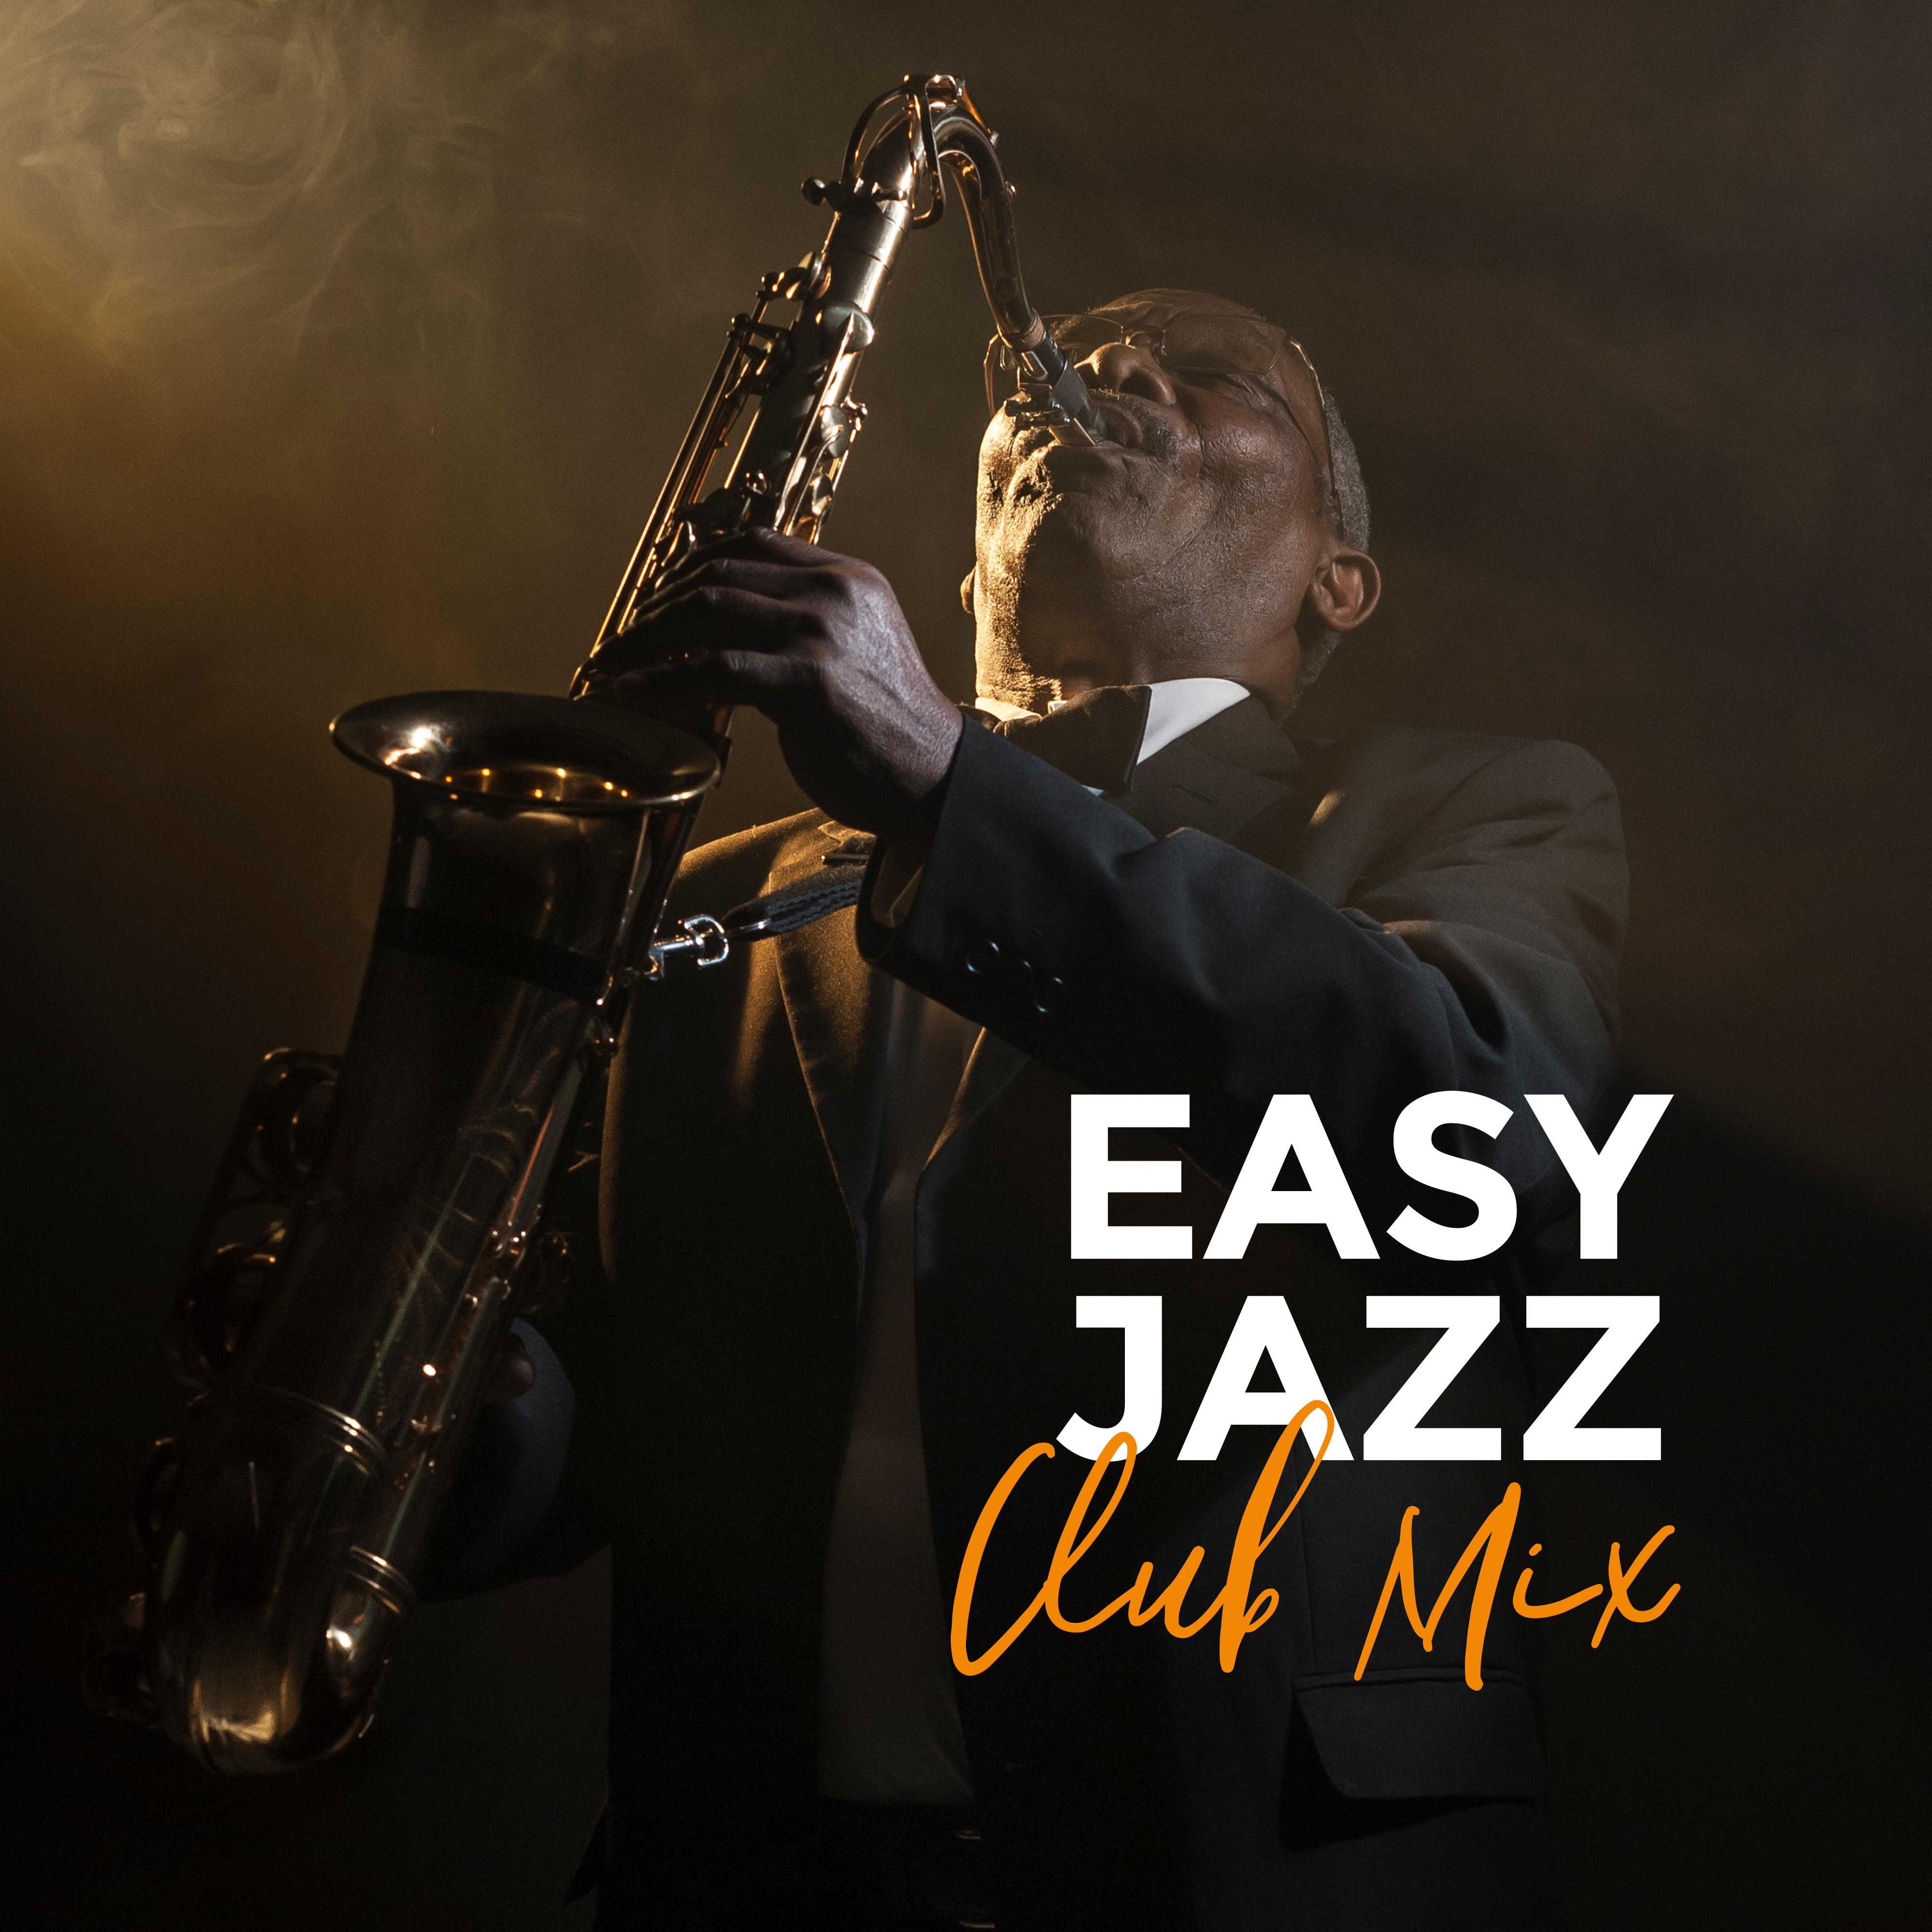 Easy Jazz Club Mix – Instrumental Smooth Jazz Music Selection for Dance Party, Happy Vintage Melodies, Sounds of Piano, Saxophone & More